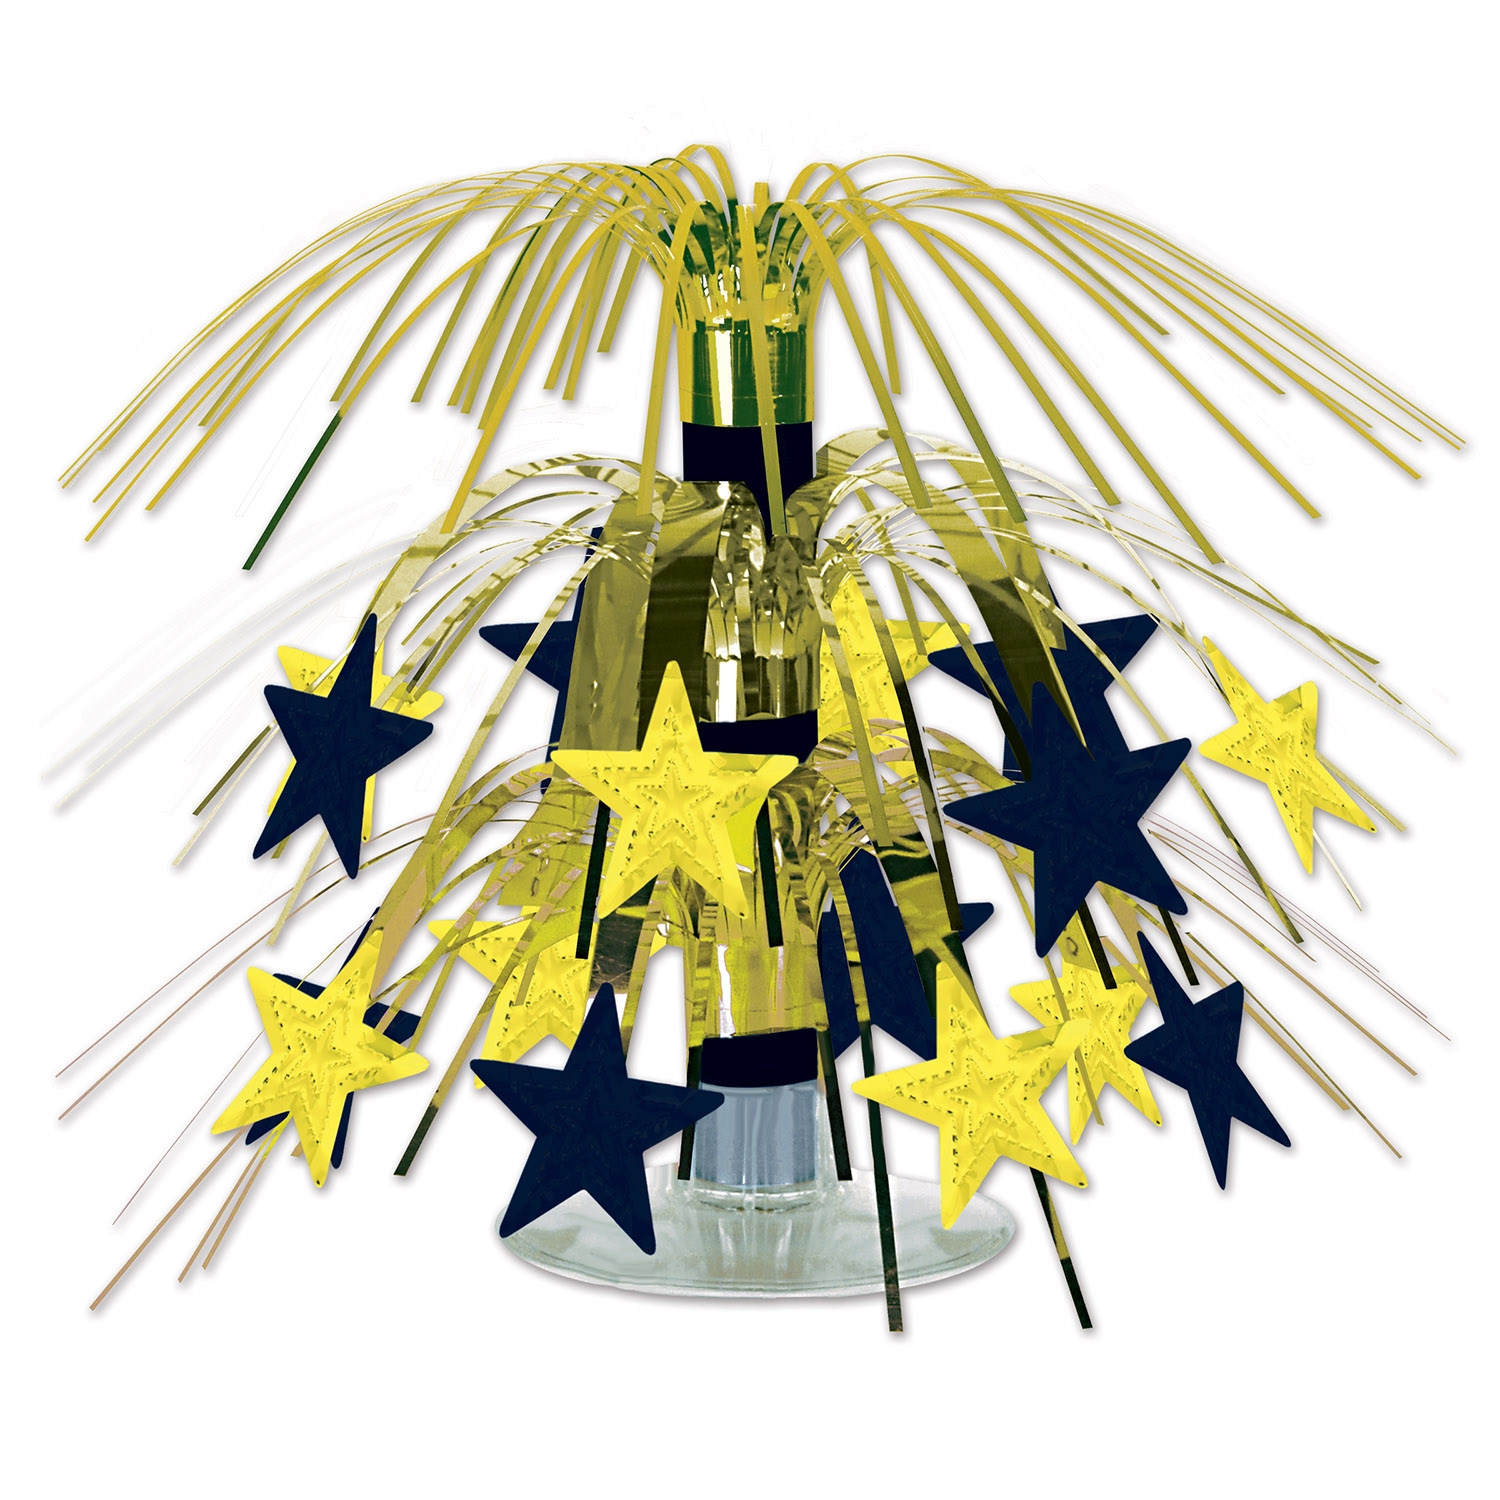 Centerpiece with cascading metallic black and gold strands and stars.